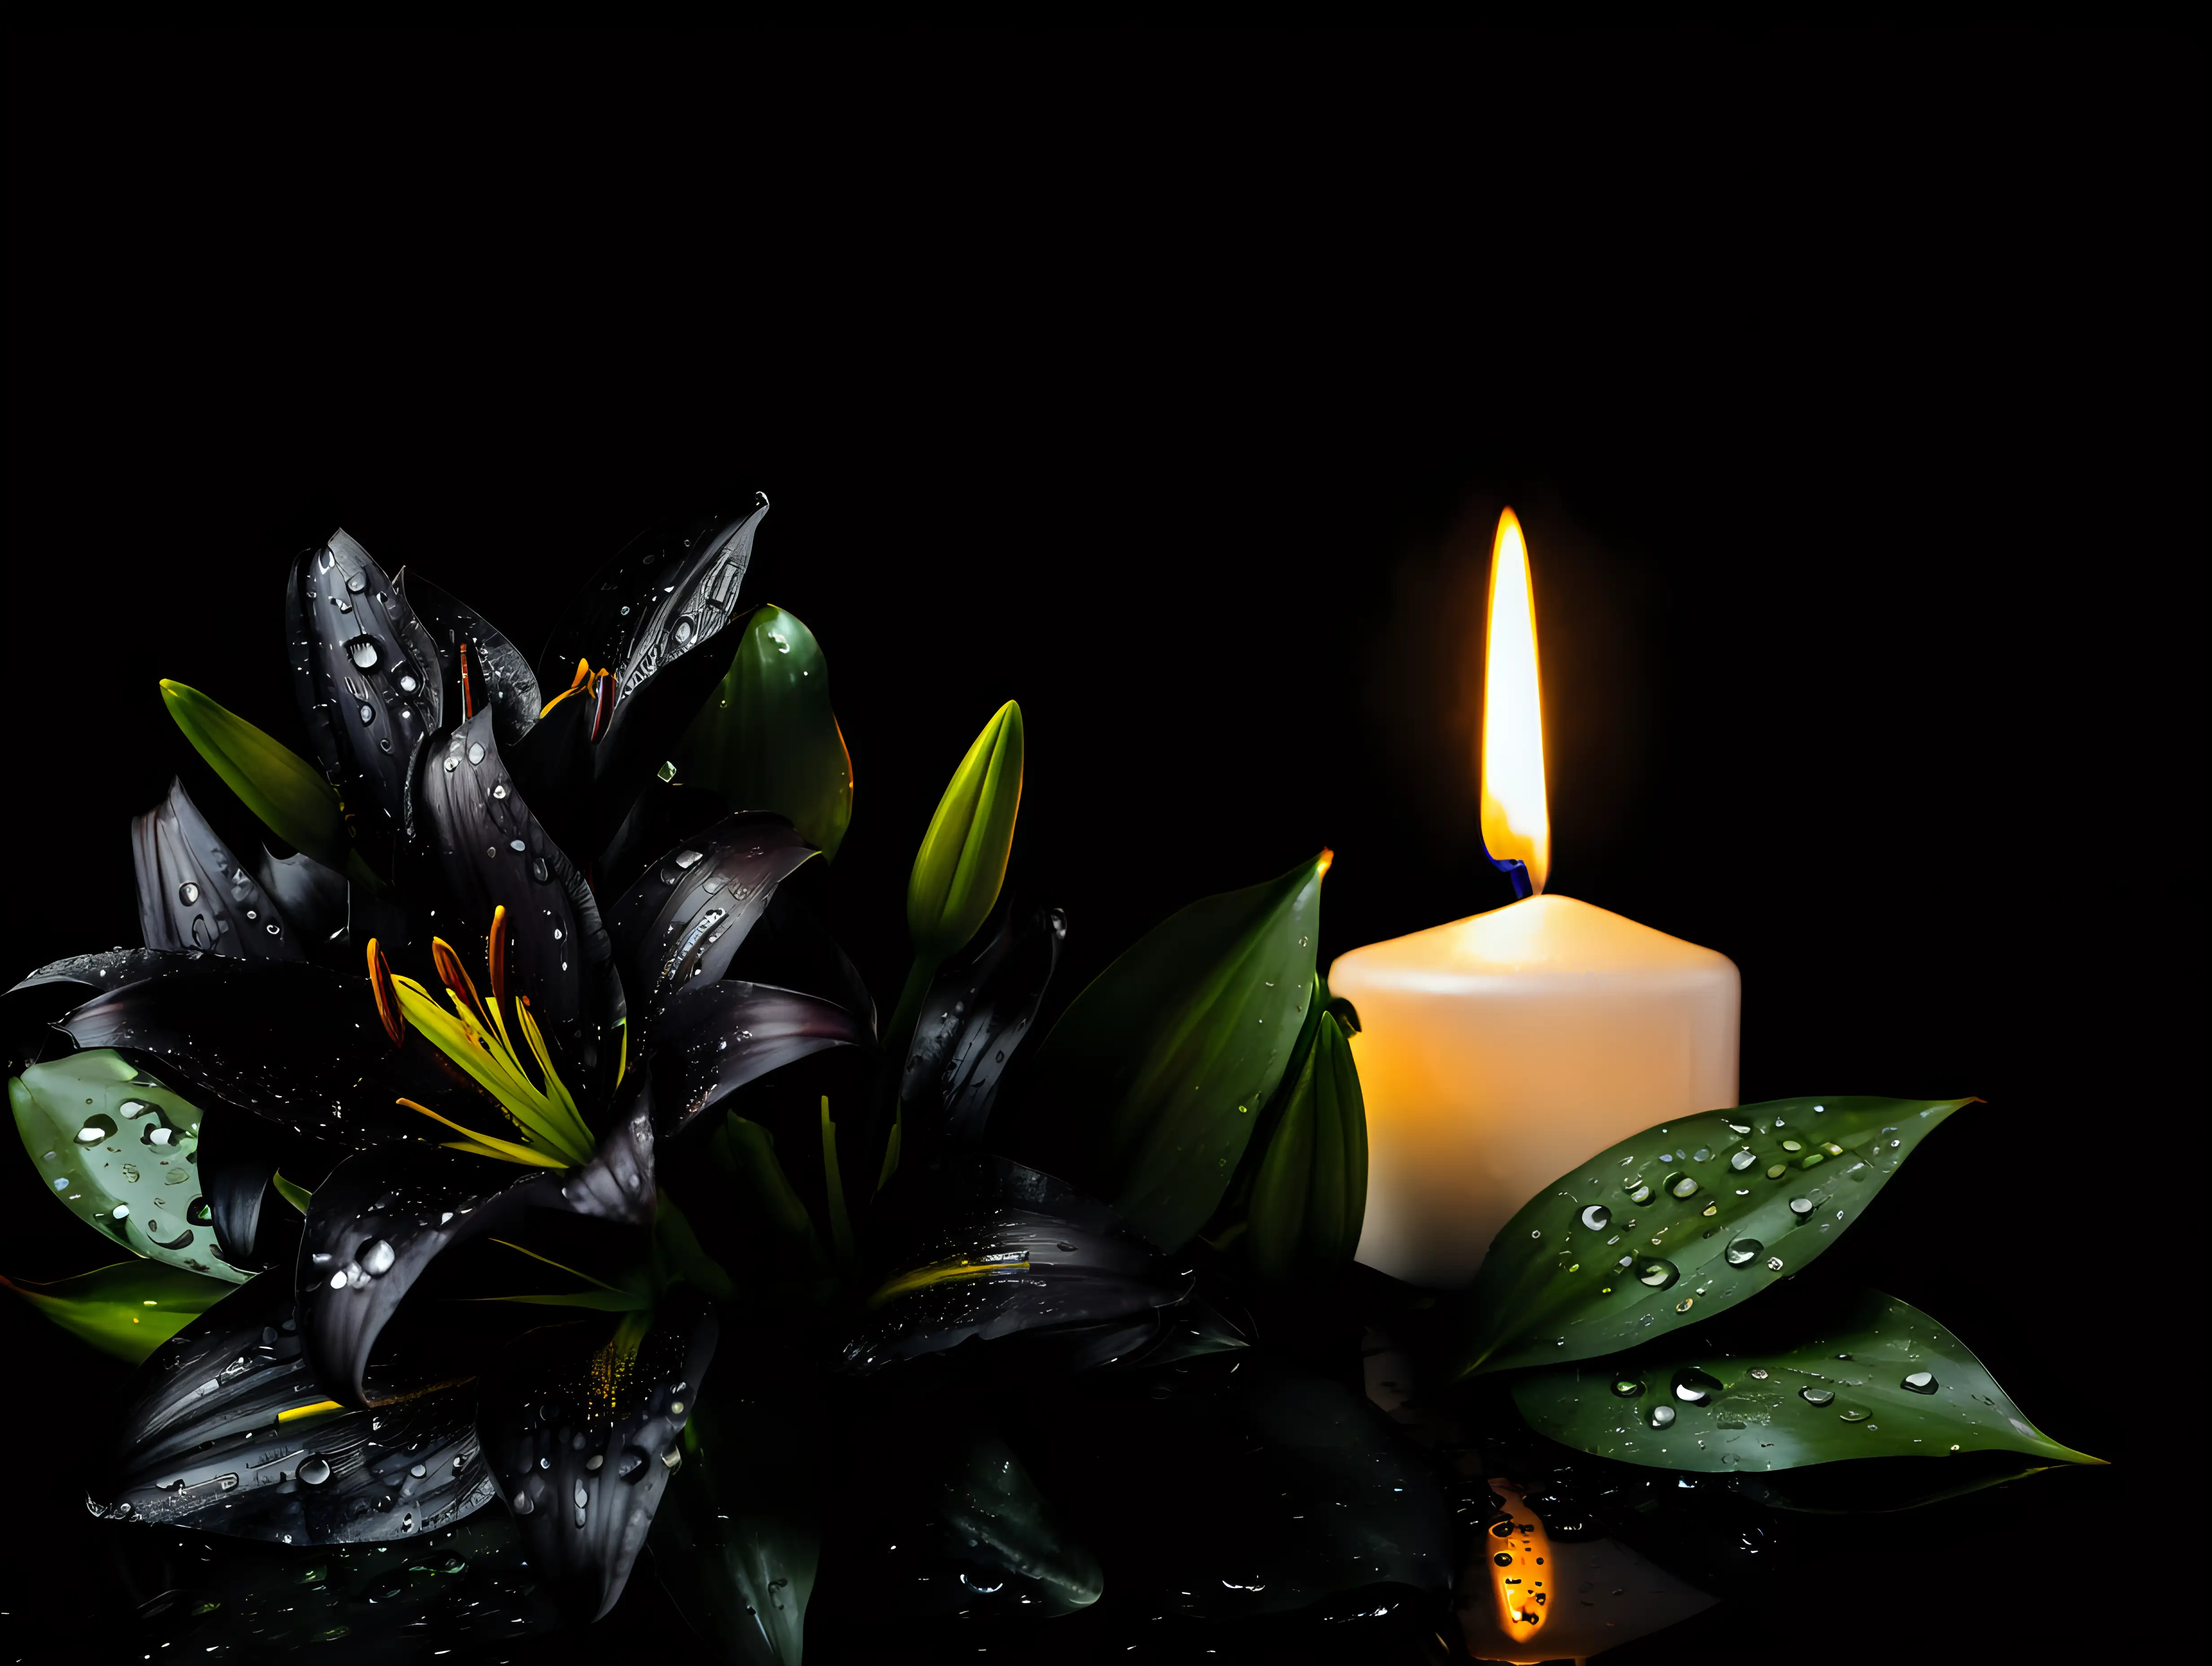 Hyperrealistic Black Lilies with Raindrops and Candle on Black Background